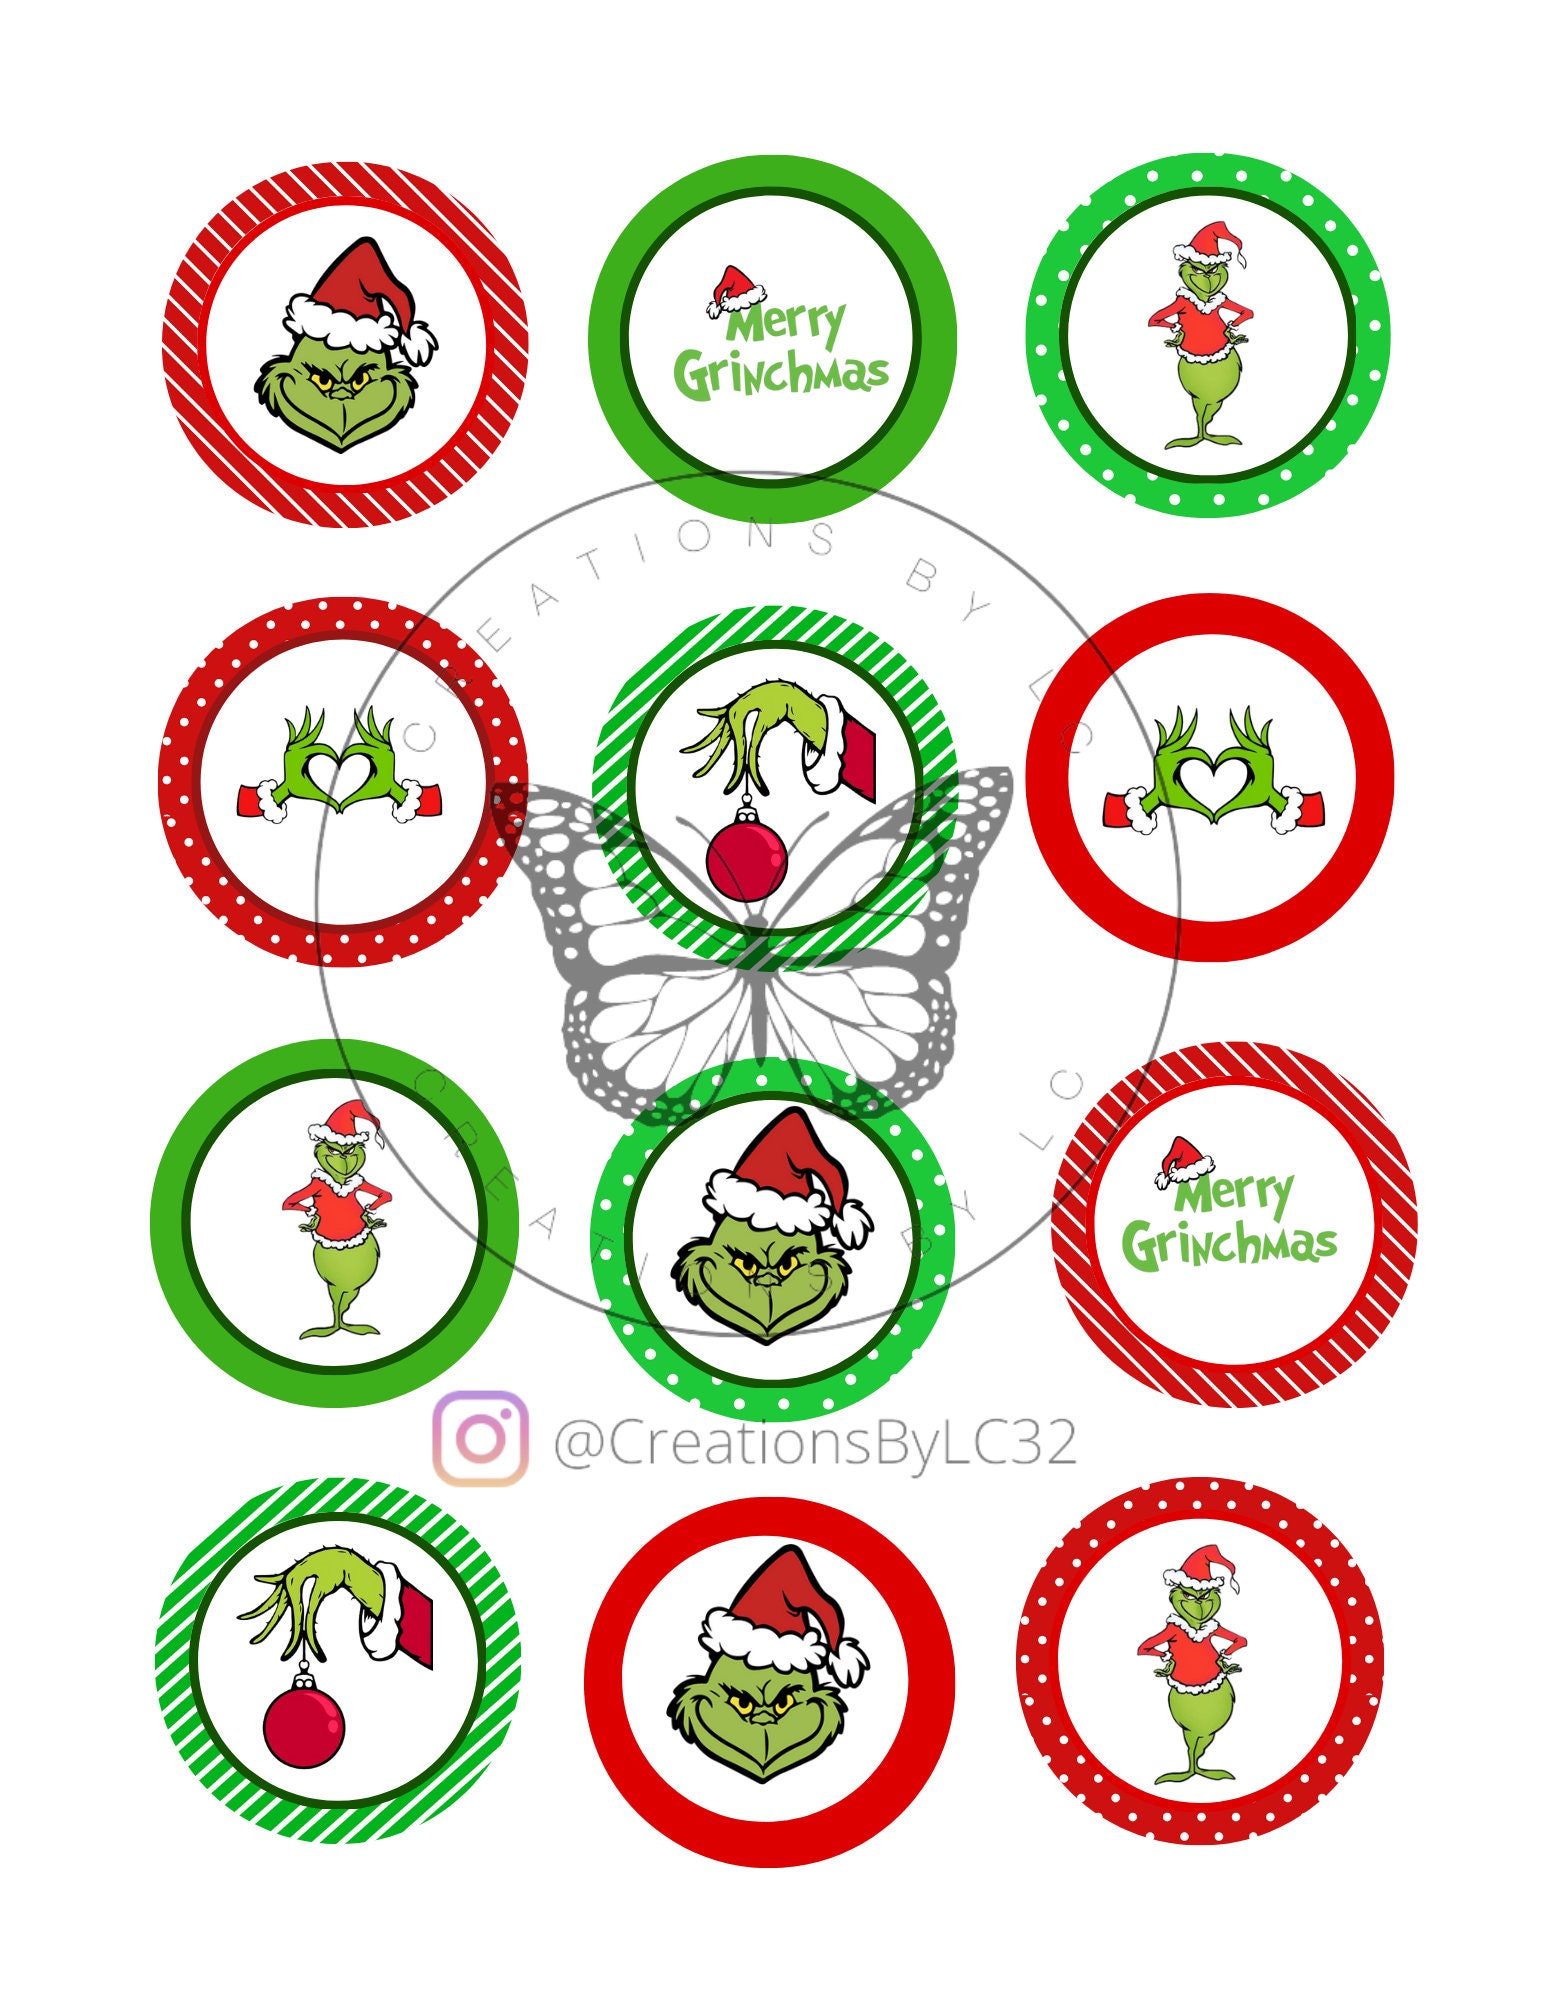 The Grinch - Animal Crossing #Ensemble Accessories Sticker